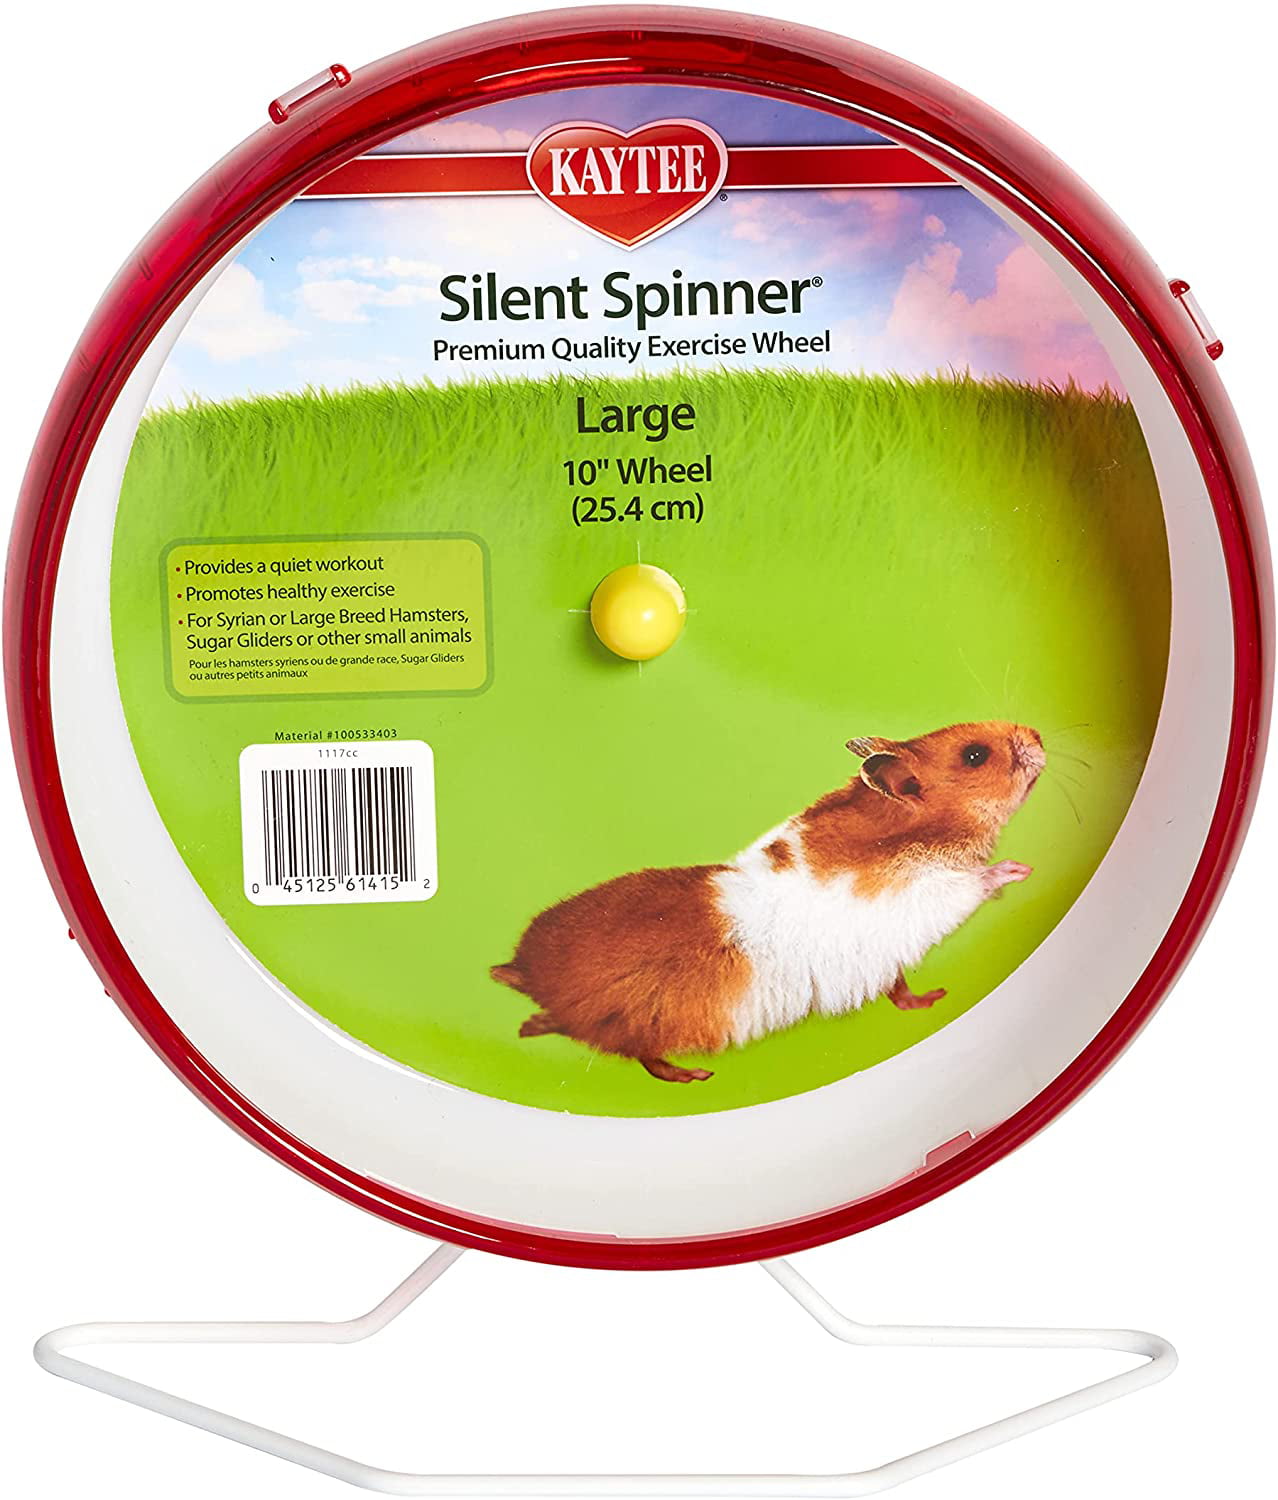 Super Pet Mouse Comfort Exercise Wheel Small Colors Vary Pi100079362 for sale online 